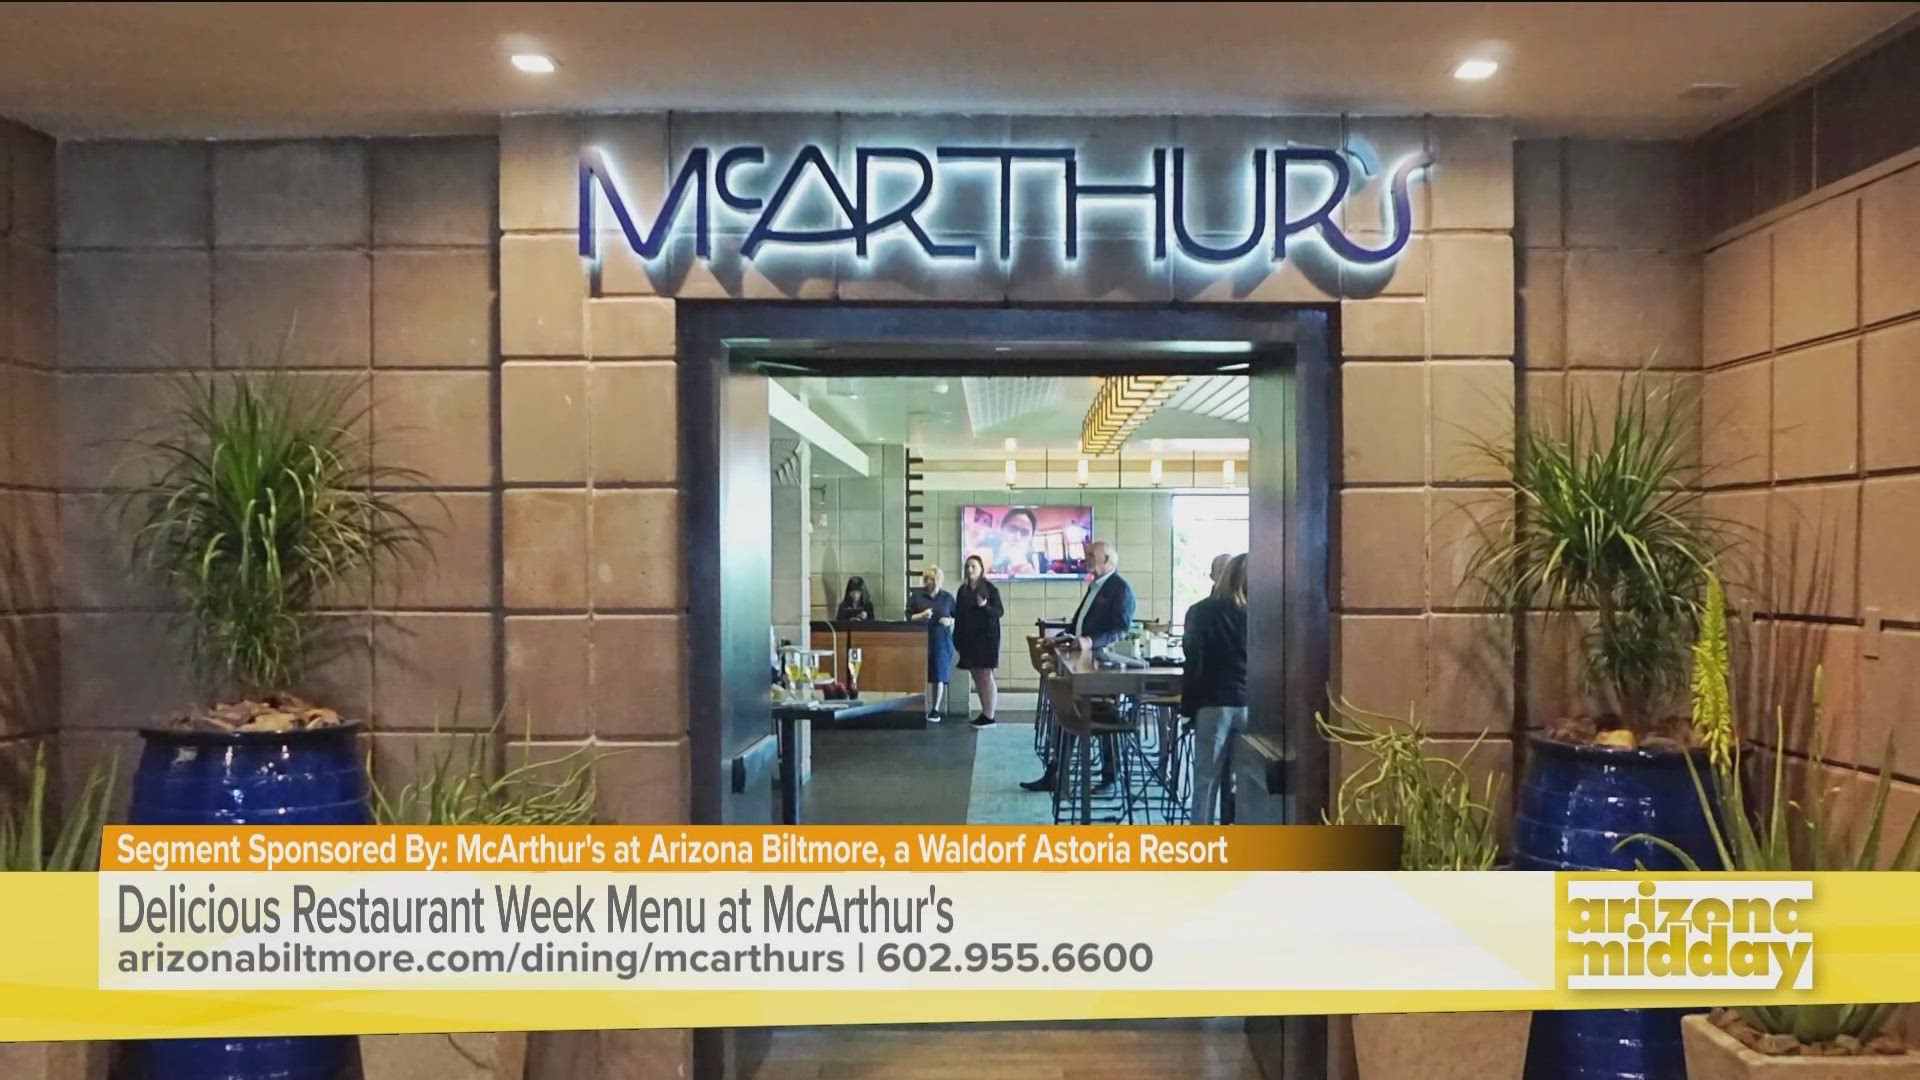 Chef Greg Joseph tells us what you can expect on the menu at McArthur's for Fall Arizona Restaurant Week.